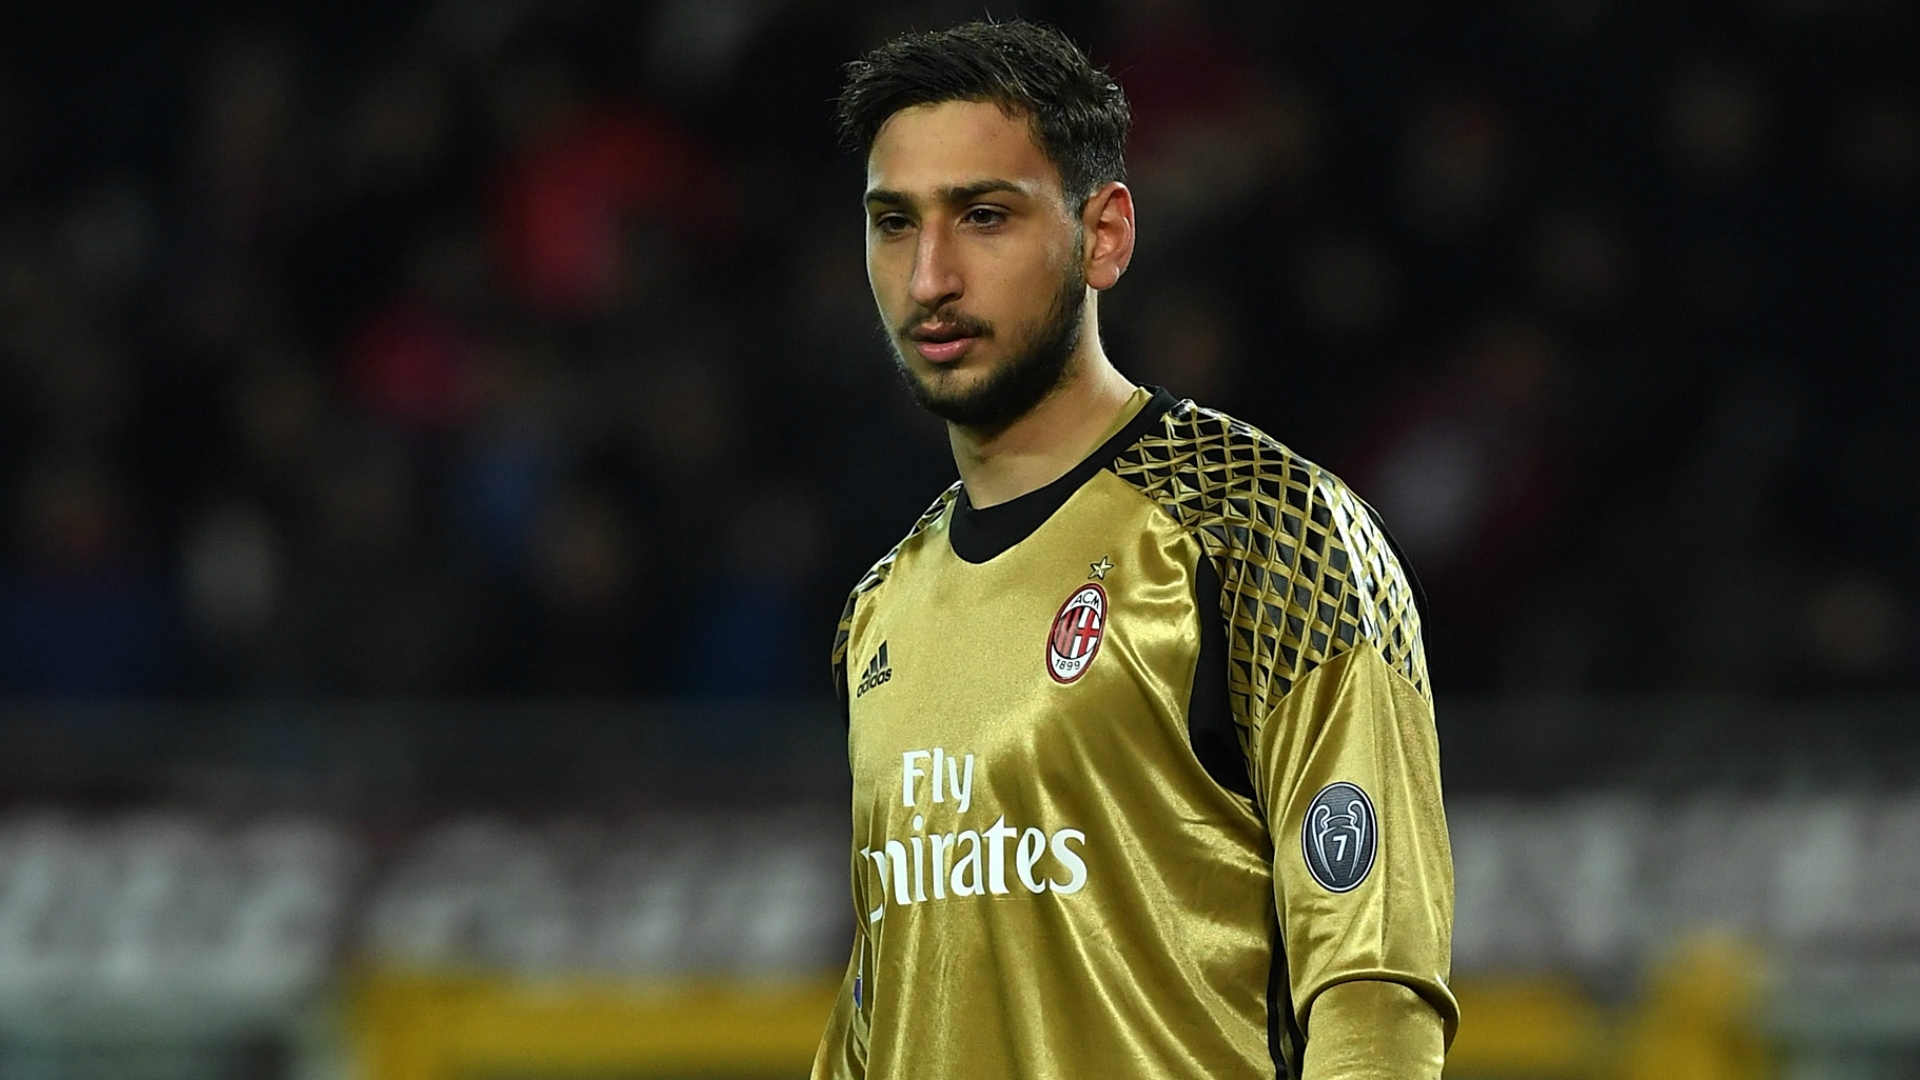 Donnarumma's contract is set to expire in 2018